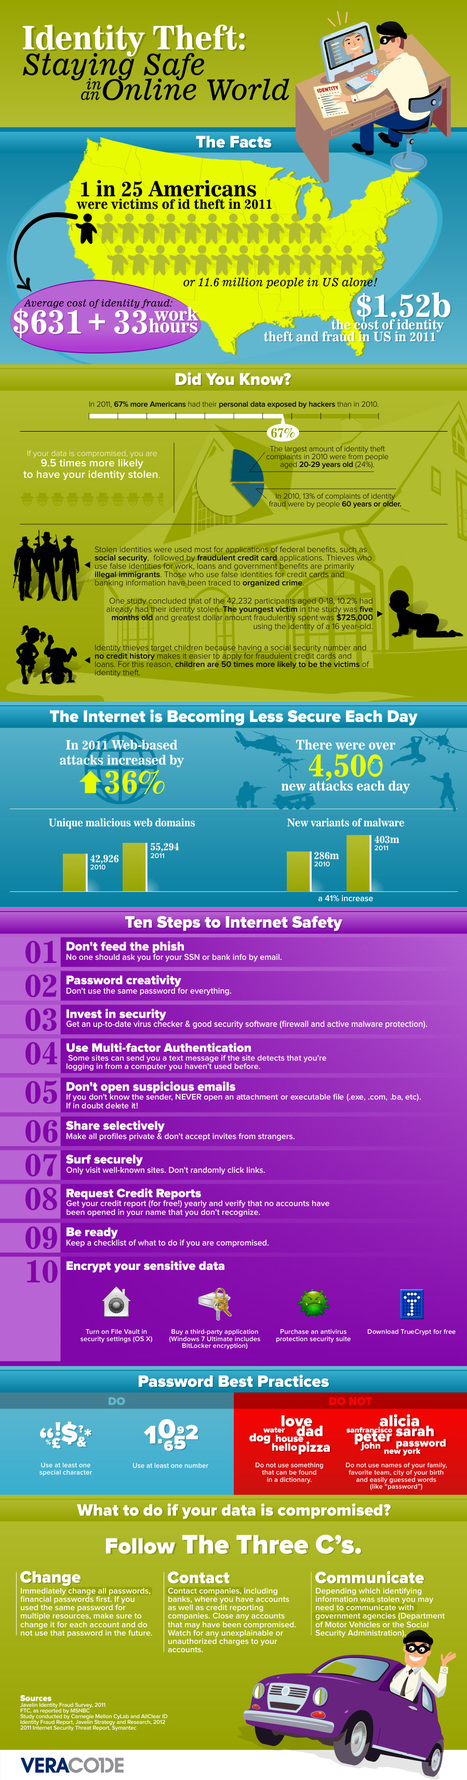 Identity Theft: Keeping Safe in an Online World [Infographic] | Pedalogica: educación y TIC | Scoop.it